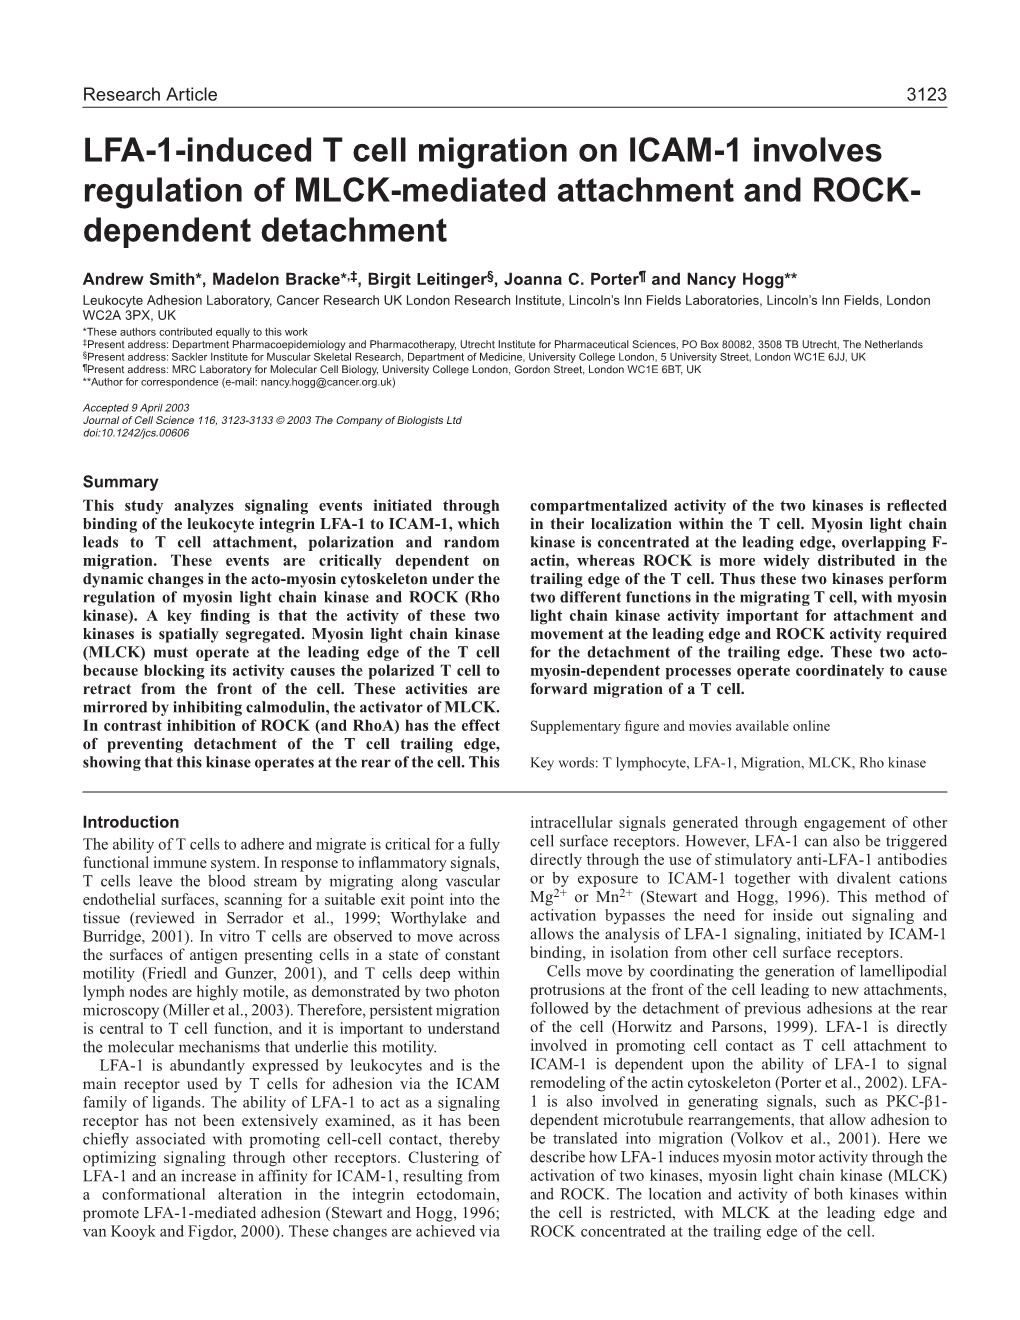 LFA-1-Induced T Cell Migration on ICAM-1 Involves Regulation of MLCK-Mediated Attachment and ROCK- Dependent Detachment